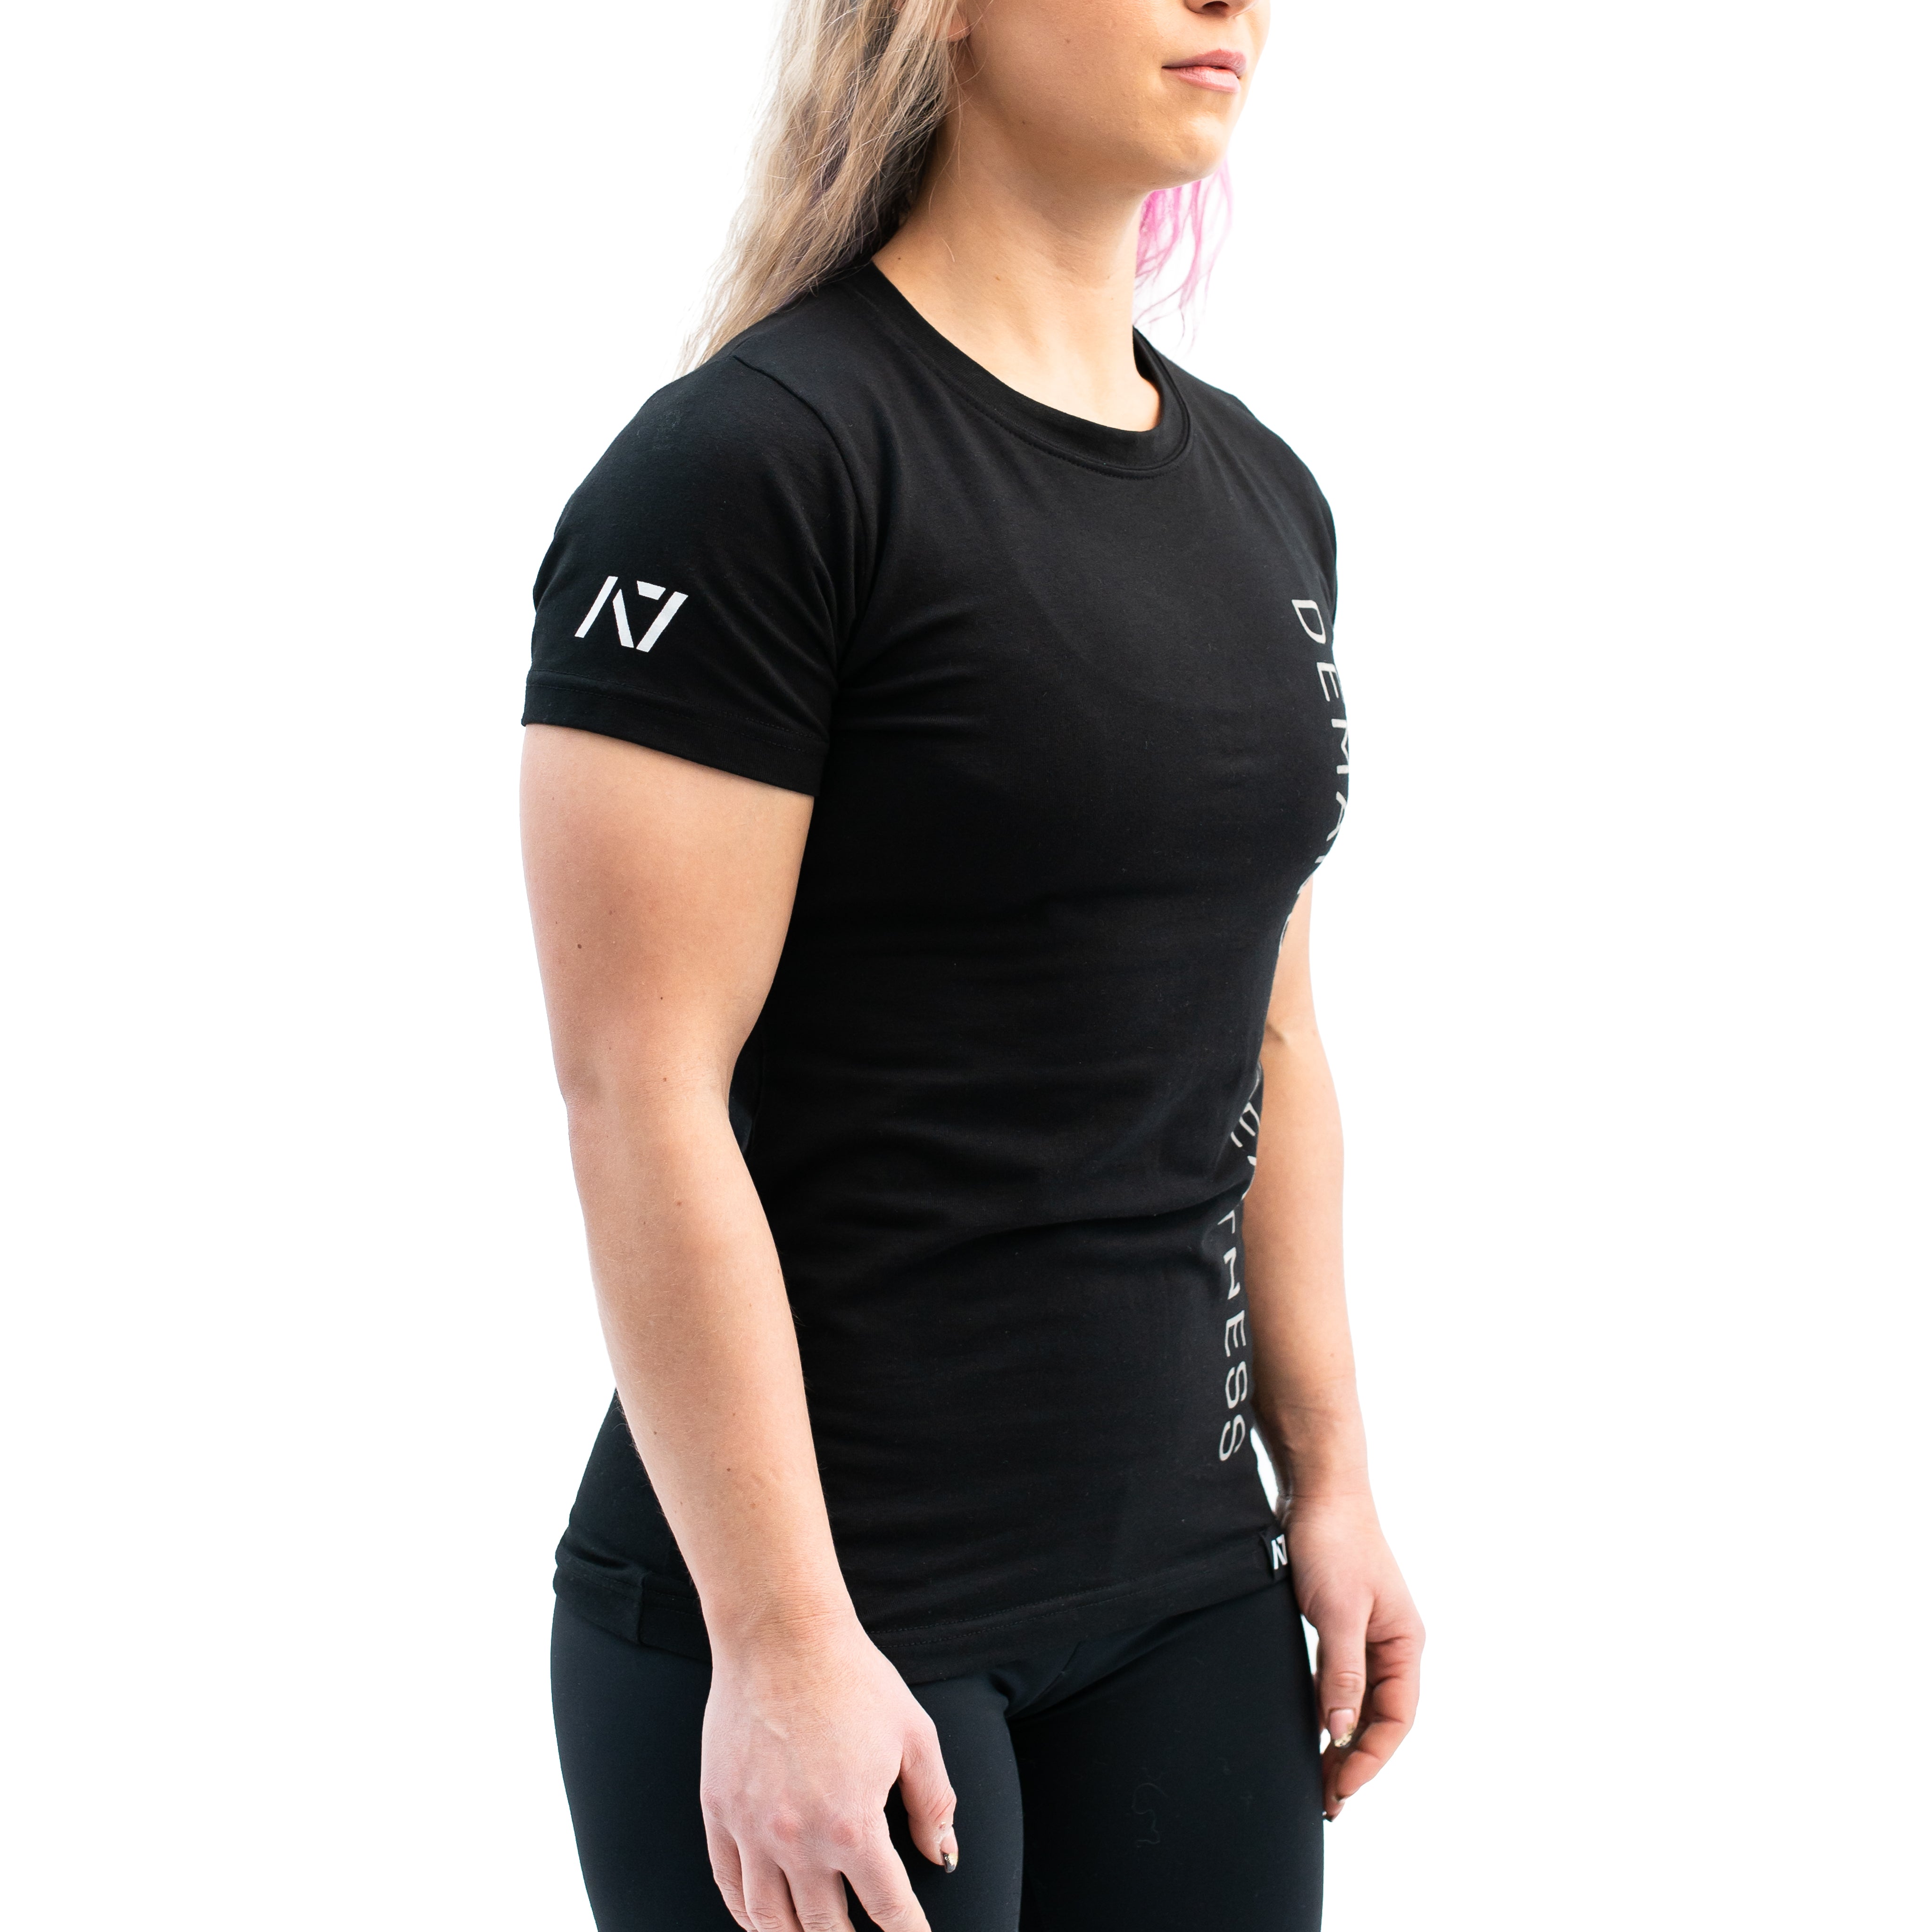 Go Far is a non-bar grip shirt great for casual wear or lifting in the gym. Purchase Go Far in UK and Europe from A7 UK. No more chalk and no more sliding. A7 have the best Bar Grip Tshirts, shipping to UK and Europe from A7 UK. Go Far is our newest non-bar grip design Demand Greatness on the front of the shirt in a chromium colourway! A7UK supplies the best Powerlifting apparel for all your workouts. Available in UK and Europe including France, Italy, Germany, the Netherlands, Sweden and Poland